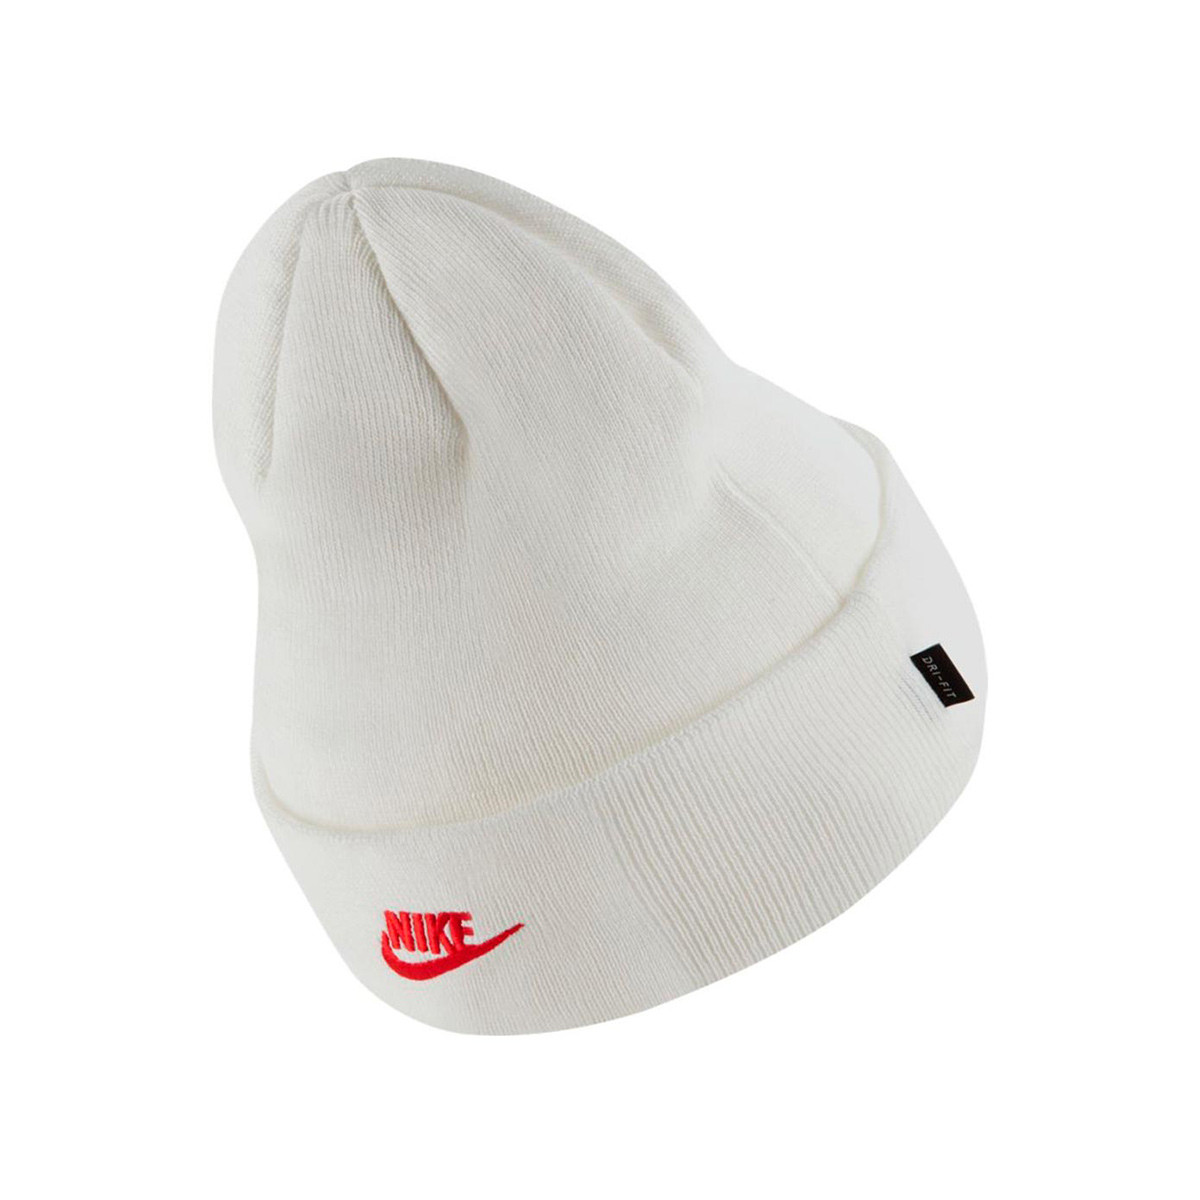 white nike hat with red swoosh